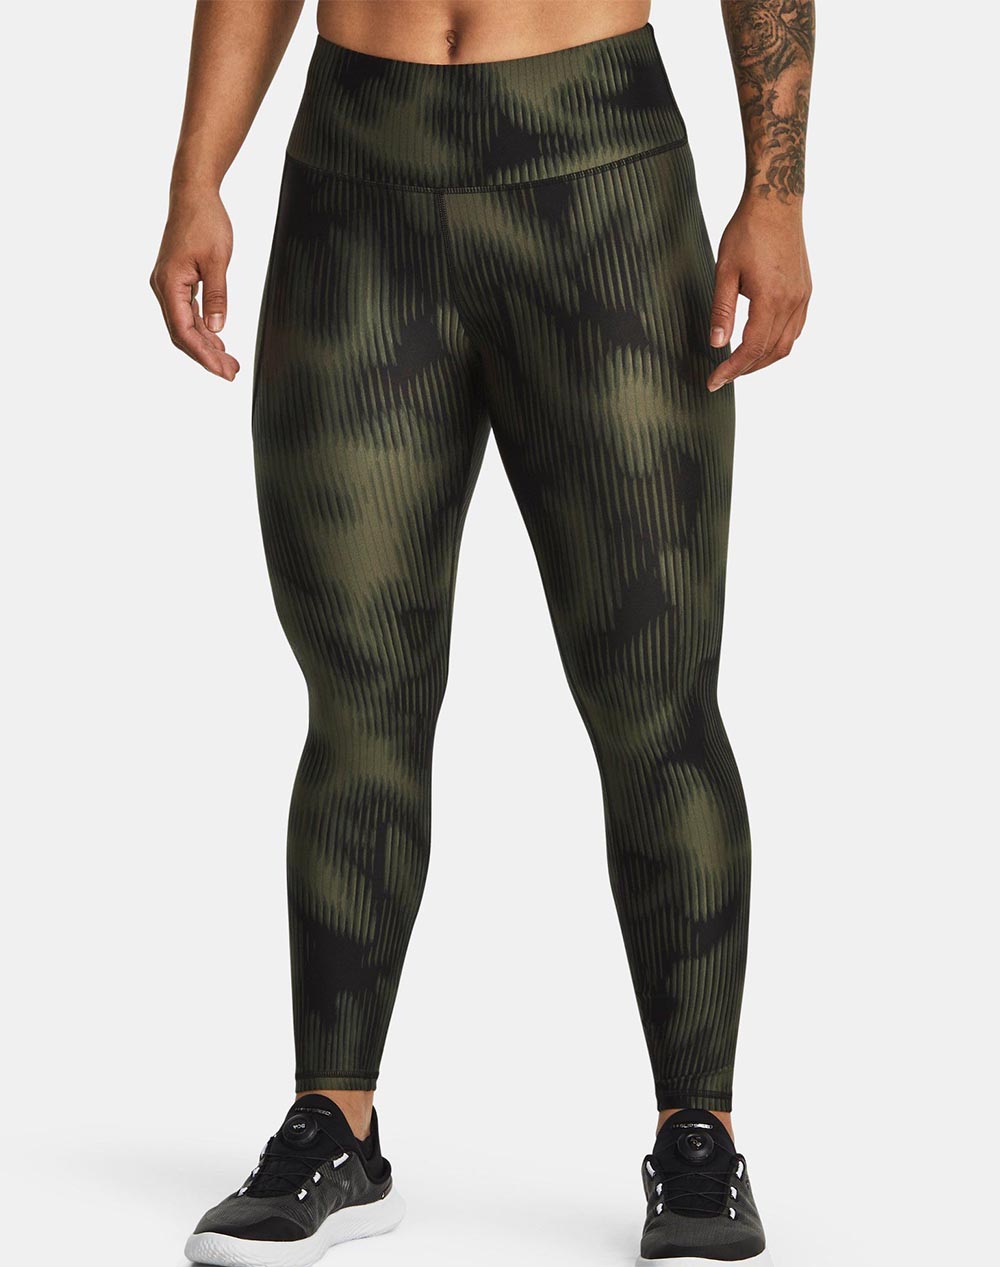 UNDER ARMOUR Women”s HeatGear® Armour Printed Ankle Leggings 1365338-390 Olive